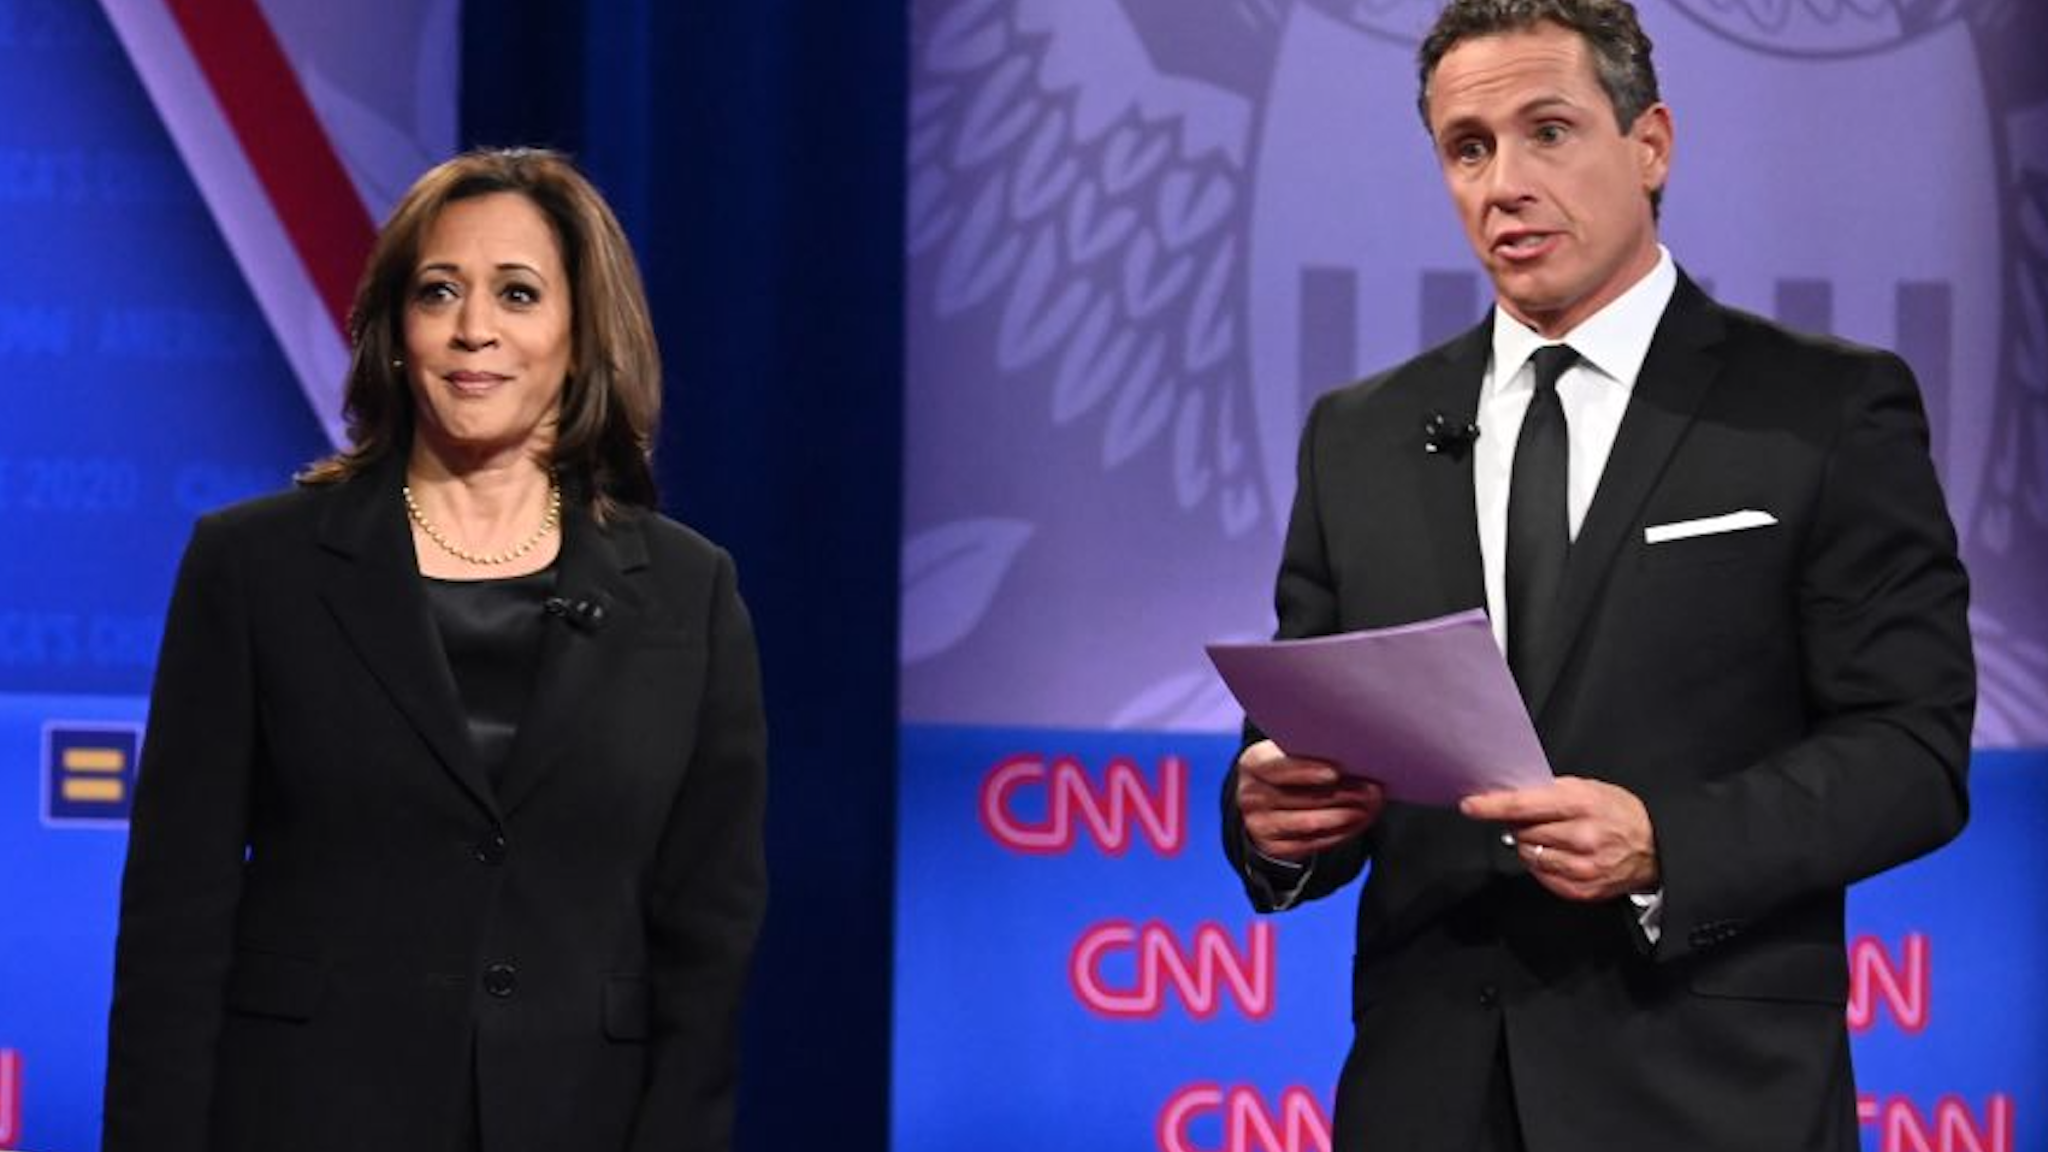 Democratic presidential hopeful California Senator Kamala Harris (L) speaks on stage alongside CNN moderator Chris Cuomo during a town hall devoted to LGBTQ issues hosted by CNN and the Human rights Campaign Foundation at The Novo in Los Angeles on October 10, 2019.